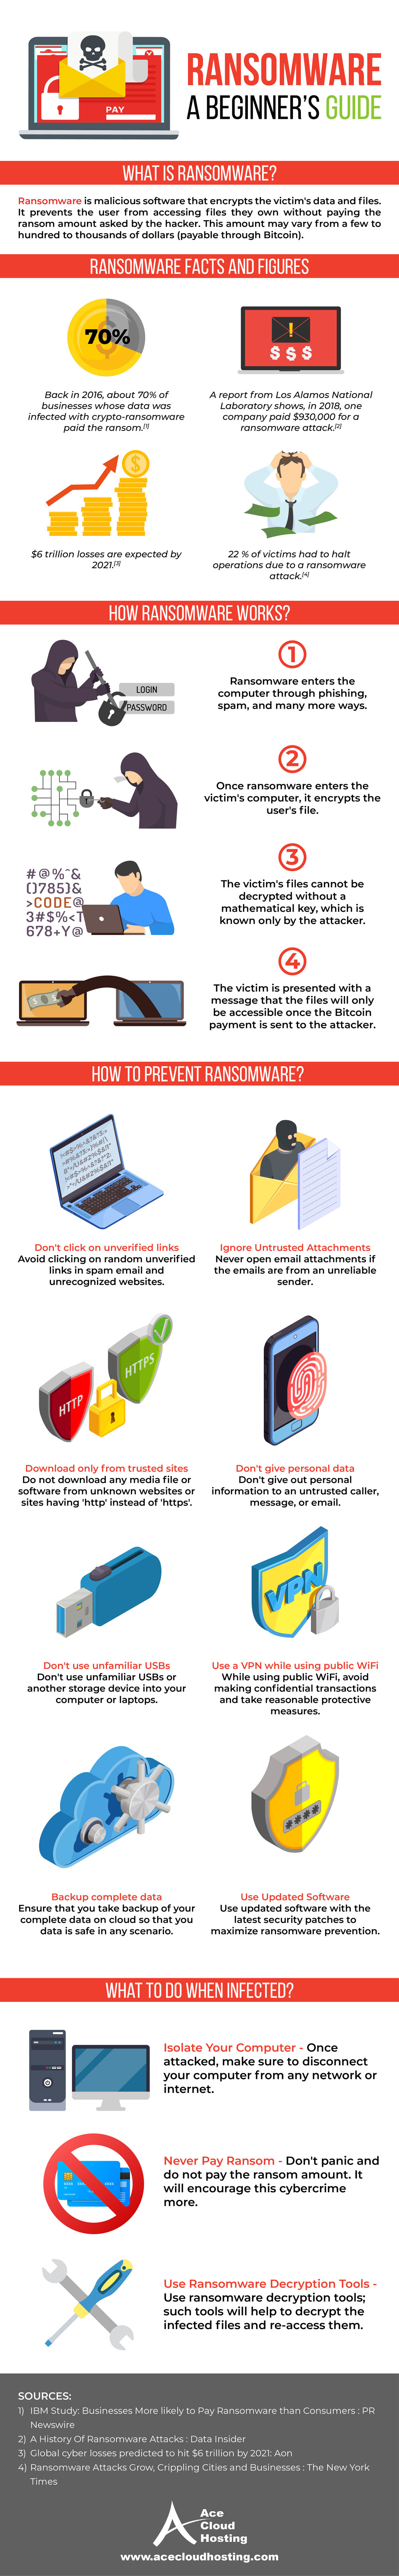 [Infographic] Ransomware - A Beginner's Guide